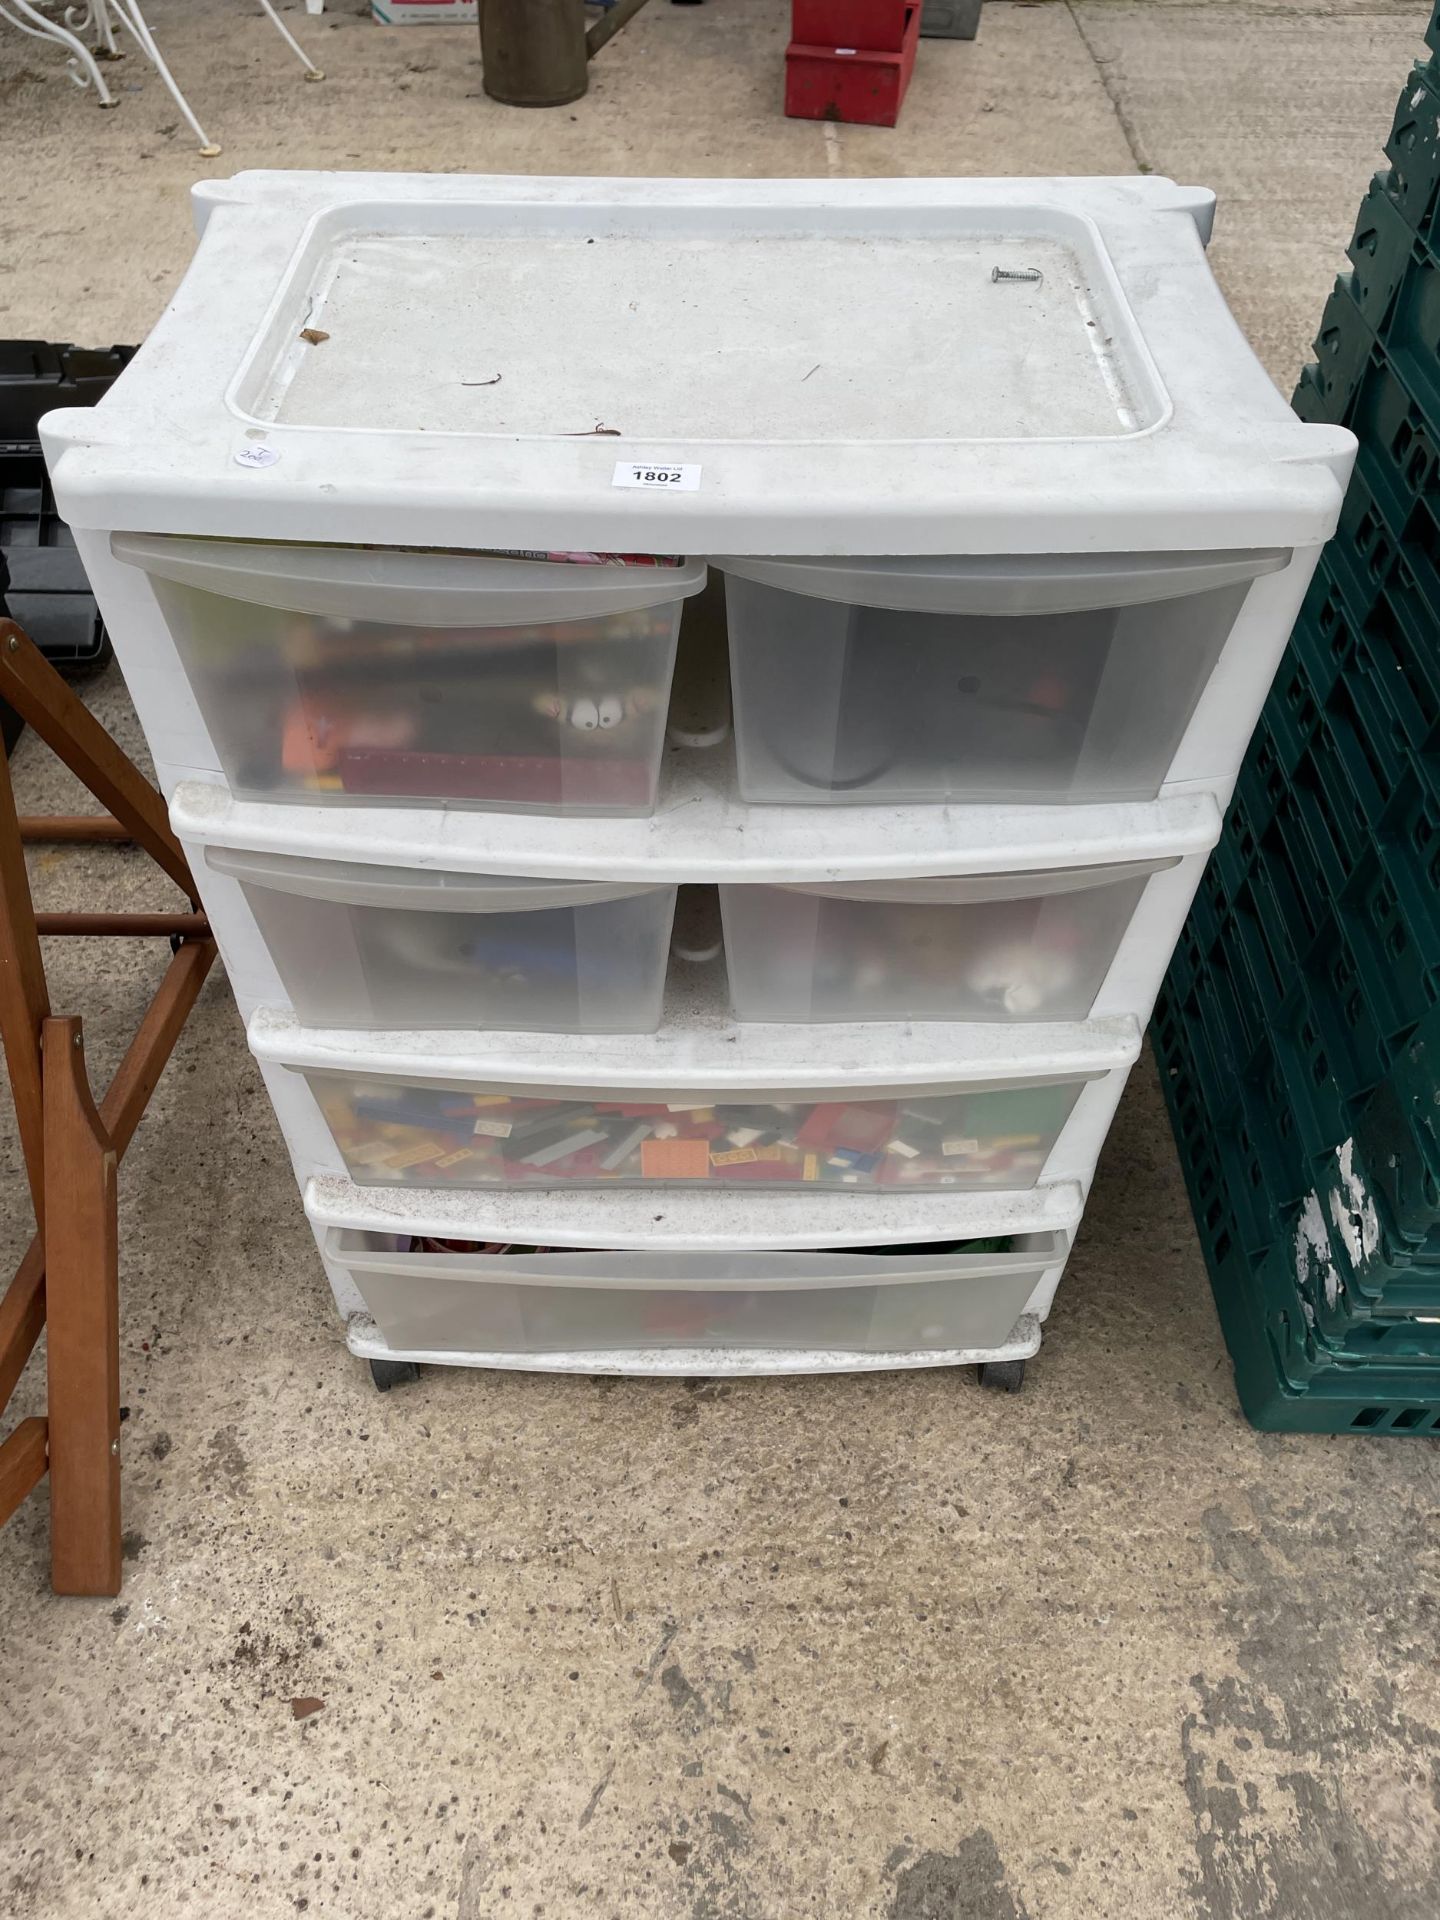 A PLASTIC STORAGE DRAWER UNIT WITH AN ASSORTMENT OF LEGO, XBOX GAMES AND OTHER TOYS ETC